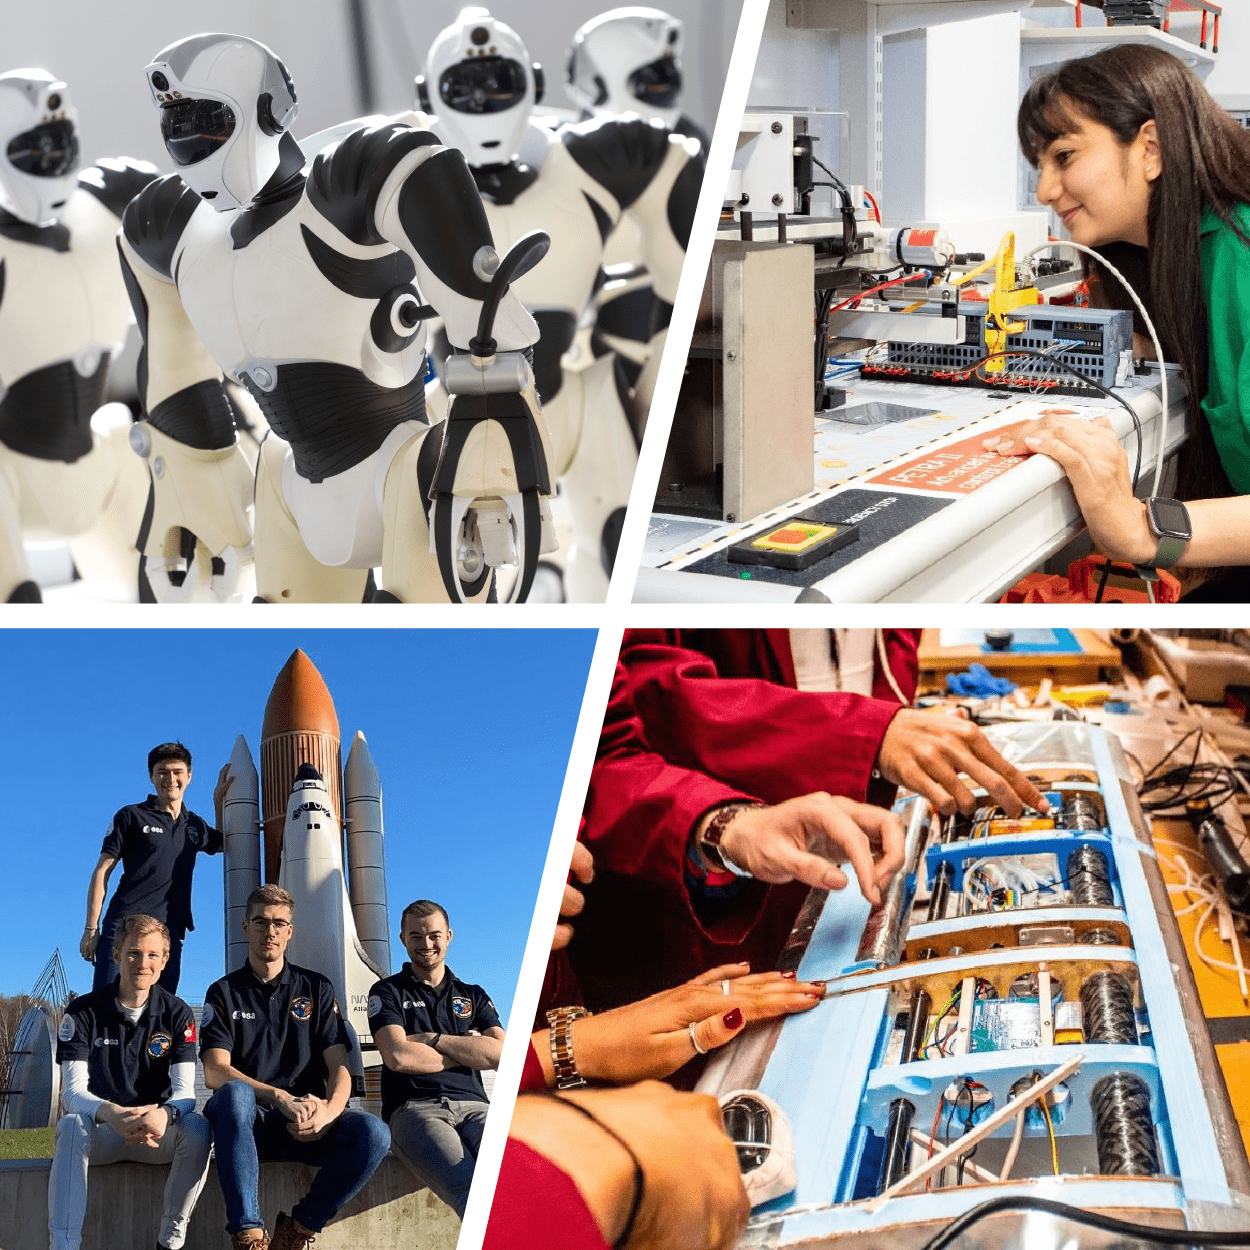 Four part image: group of robot people; student in lab; students with rocket; hands using engineering equipment